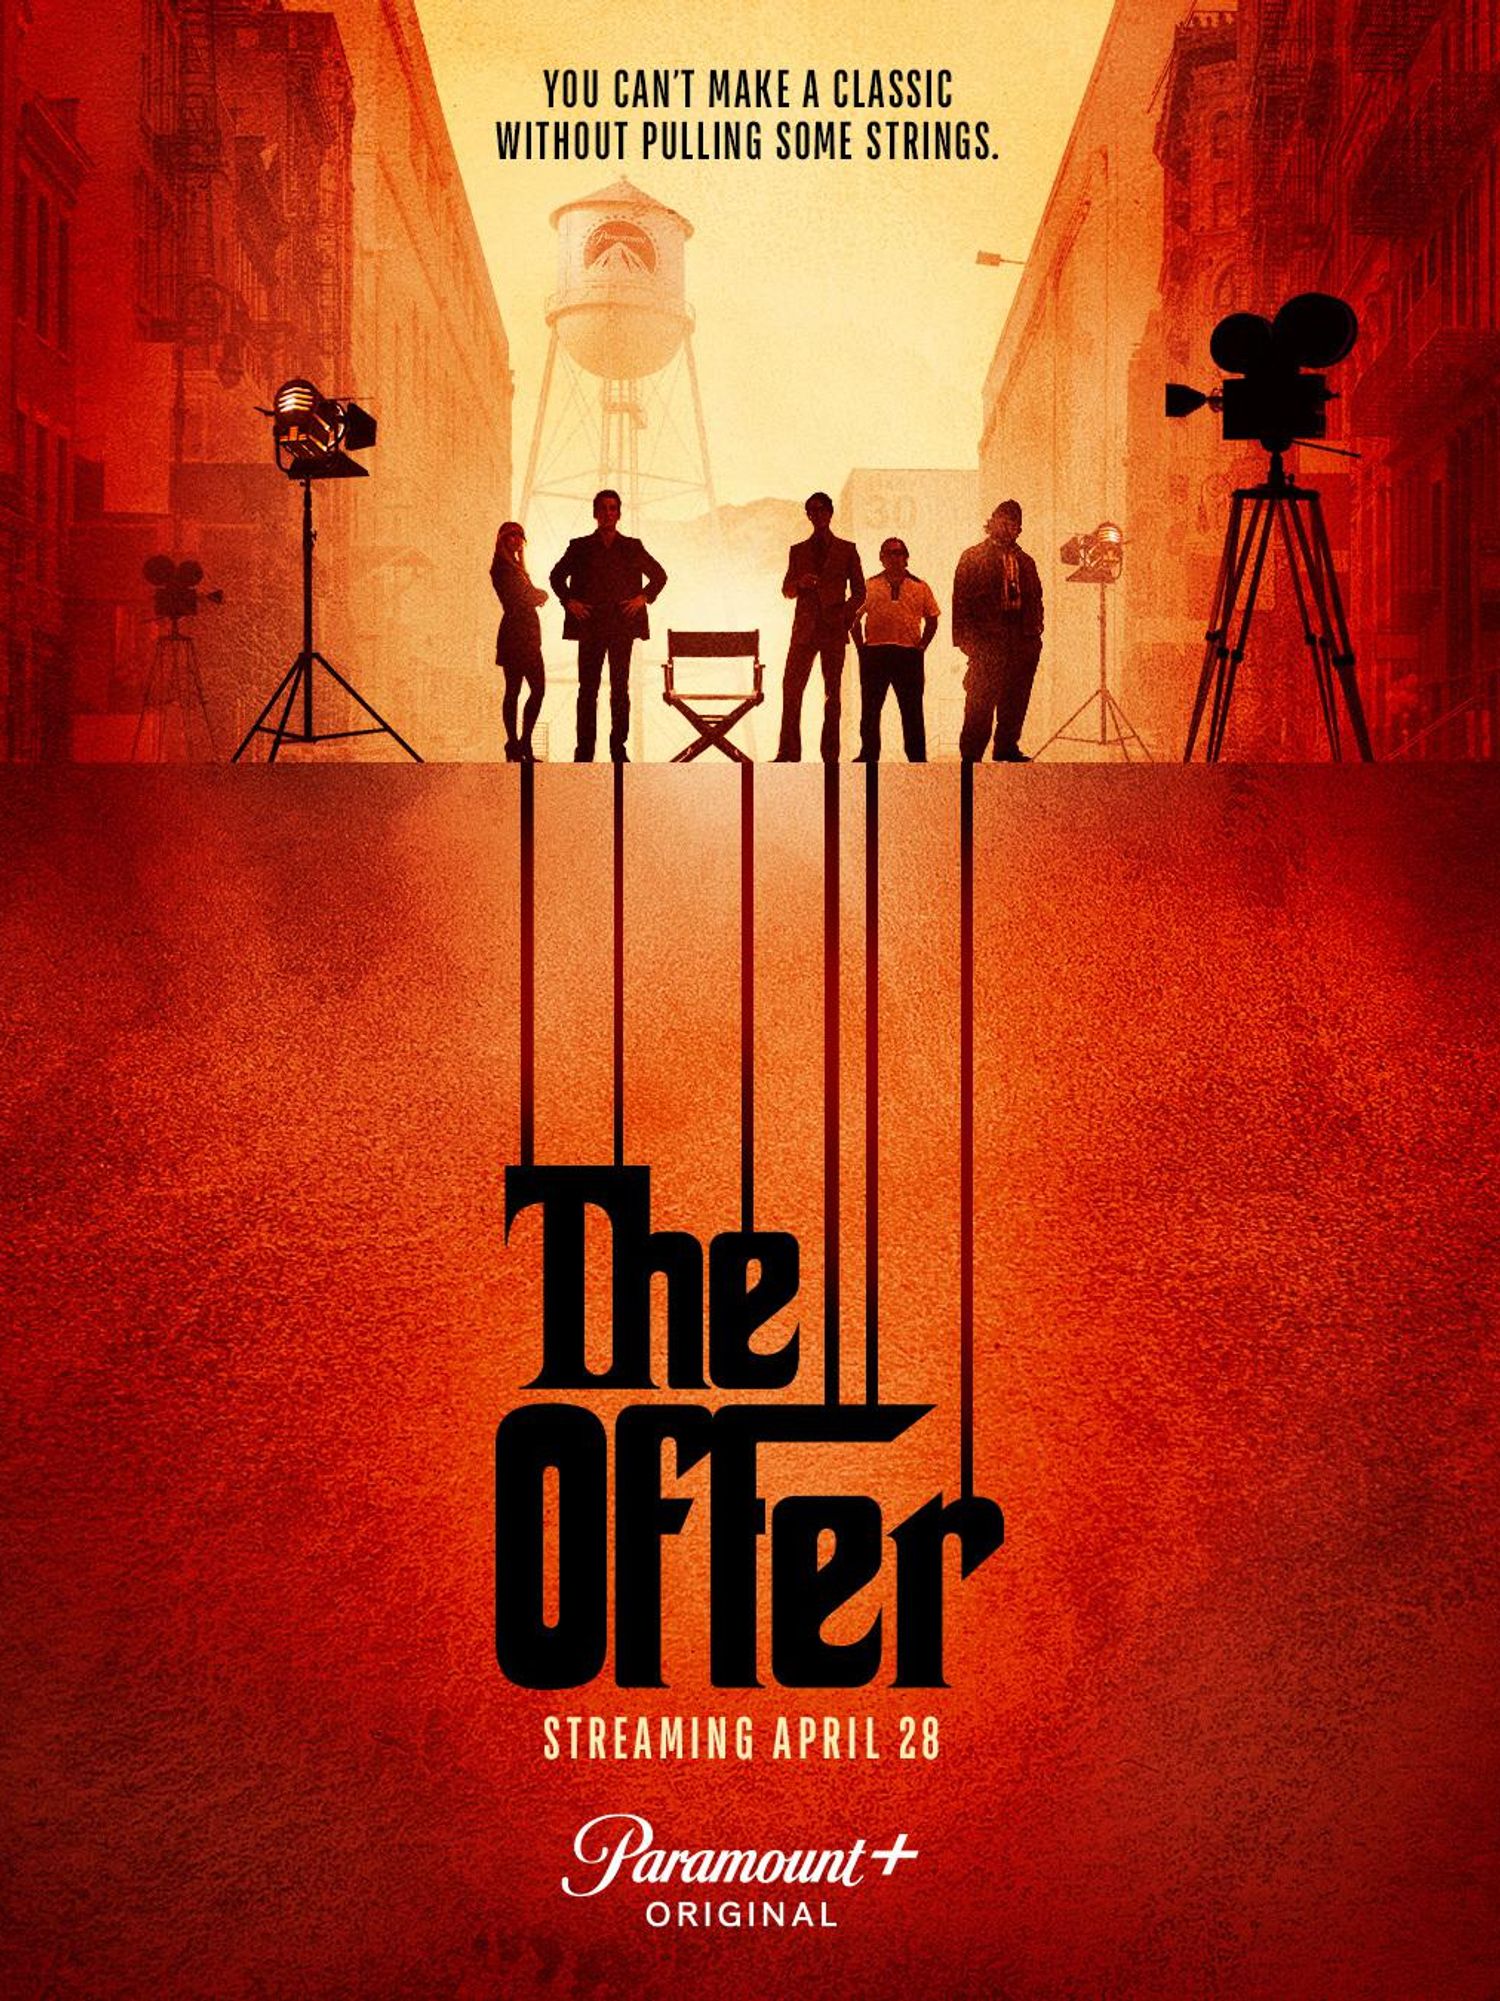 Red and yellow promotional poster for the new Paramount+ series The Offer with a font and logo inspired by original art from The Godfather